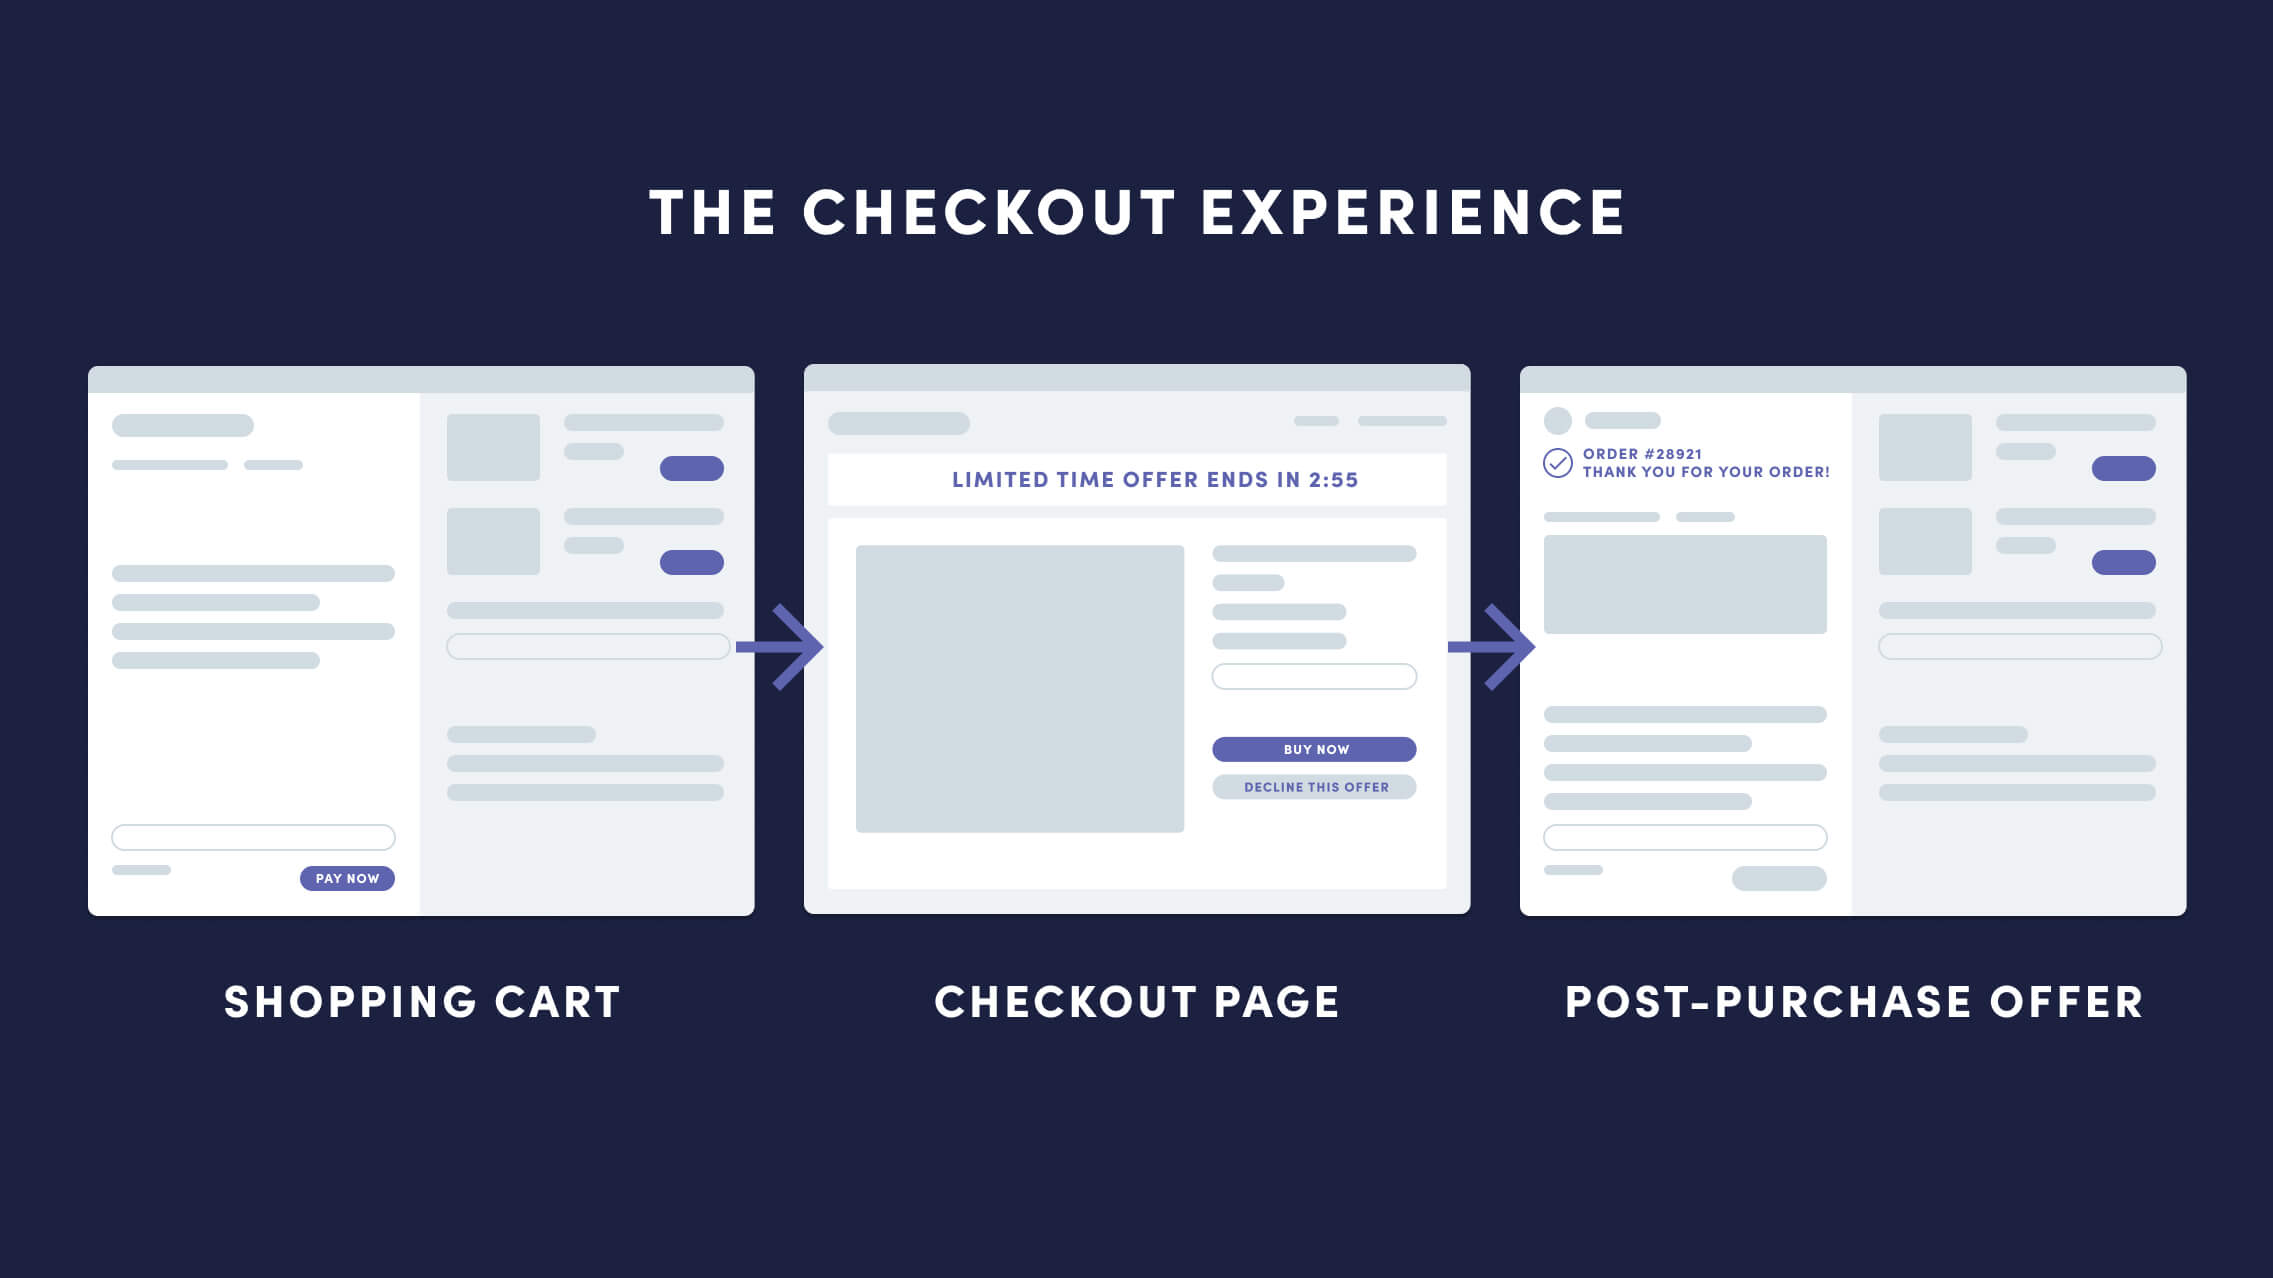 The Checkout Experience flow